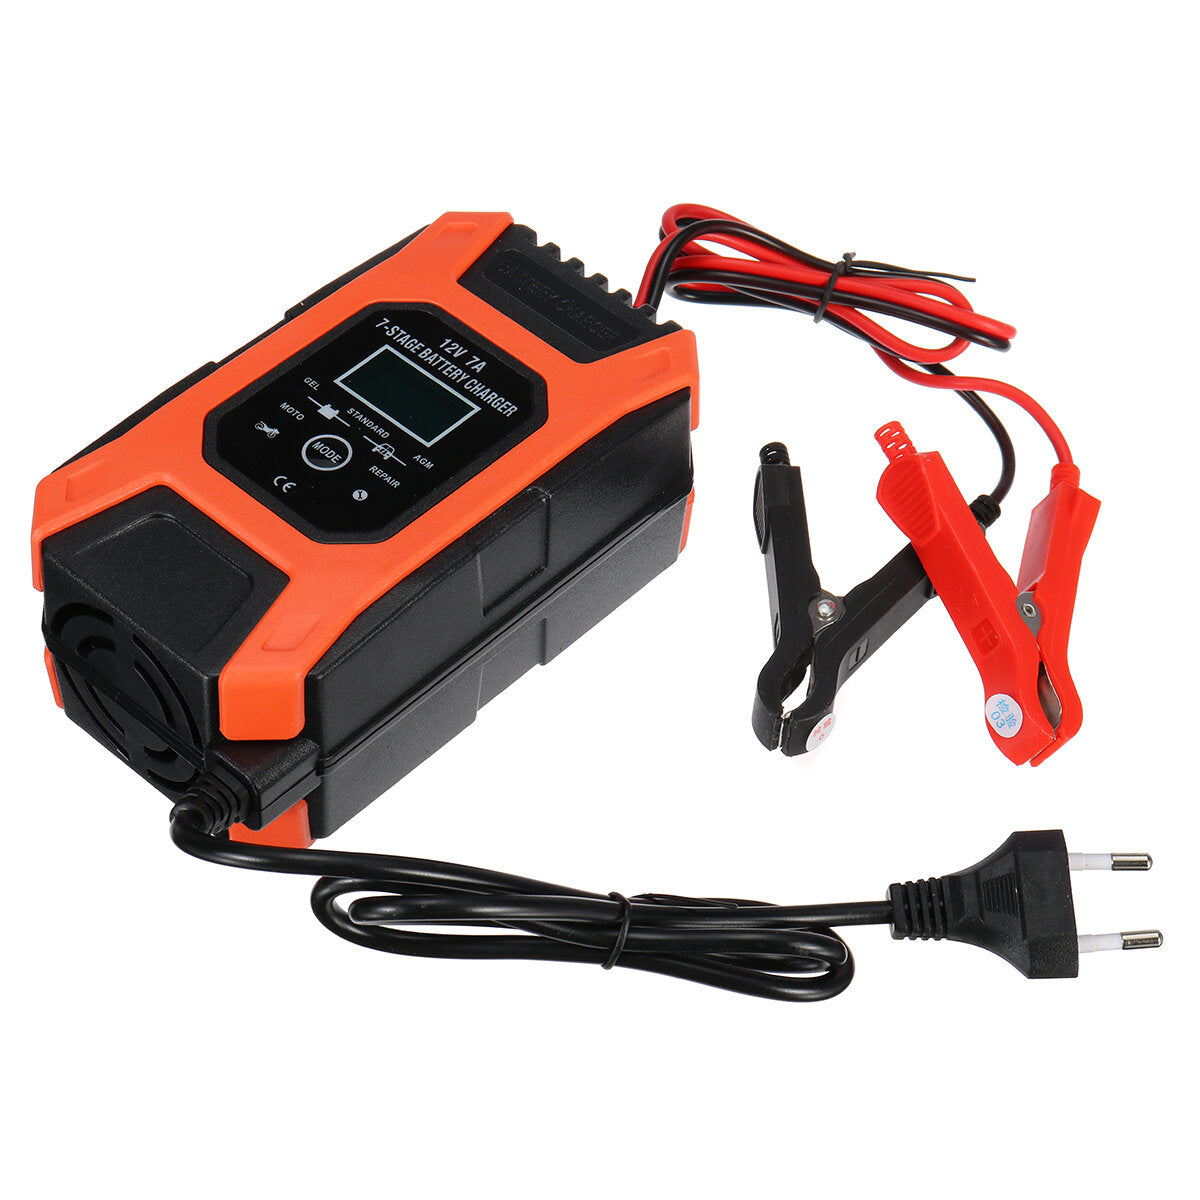 12 v 7a 7-traps lcd pulsreparatie acculader voor auto motor agm gel nat loodzuur